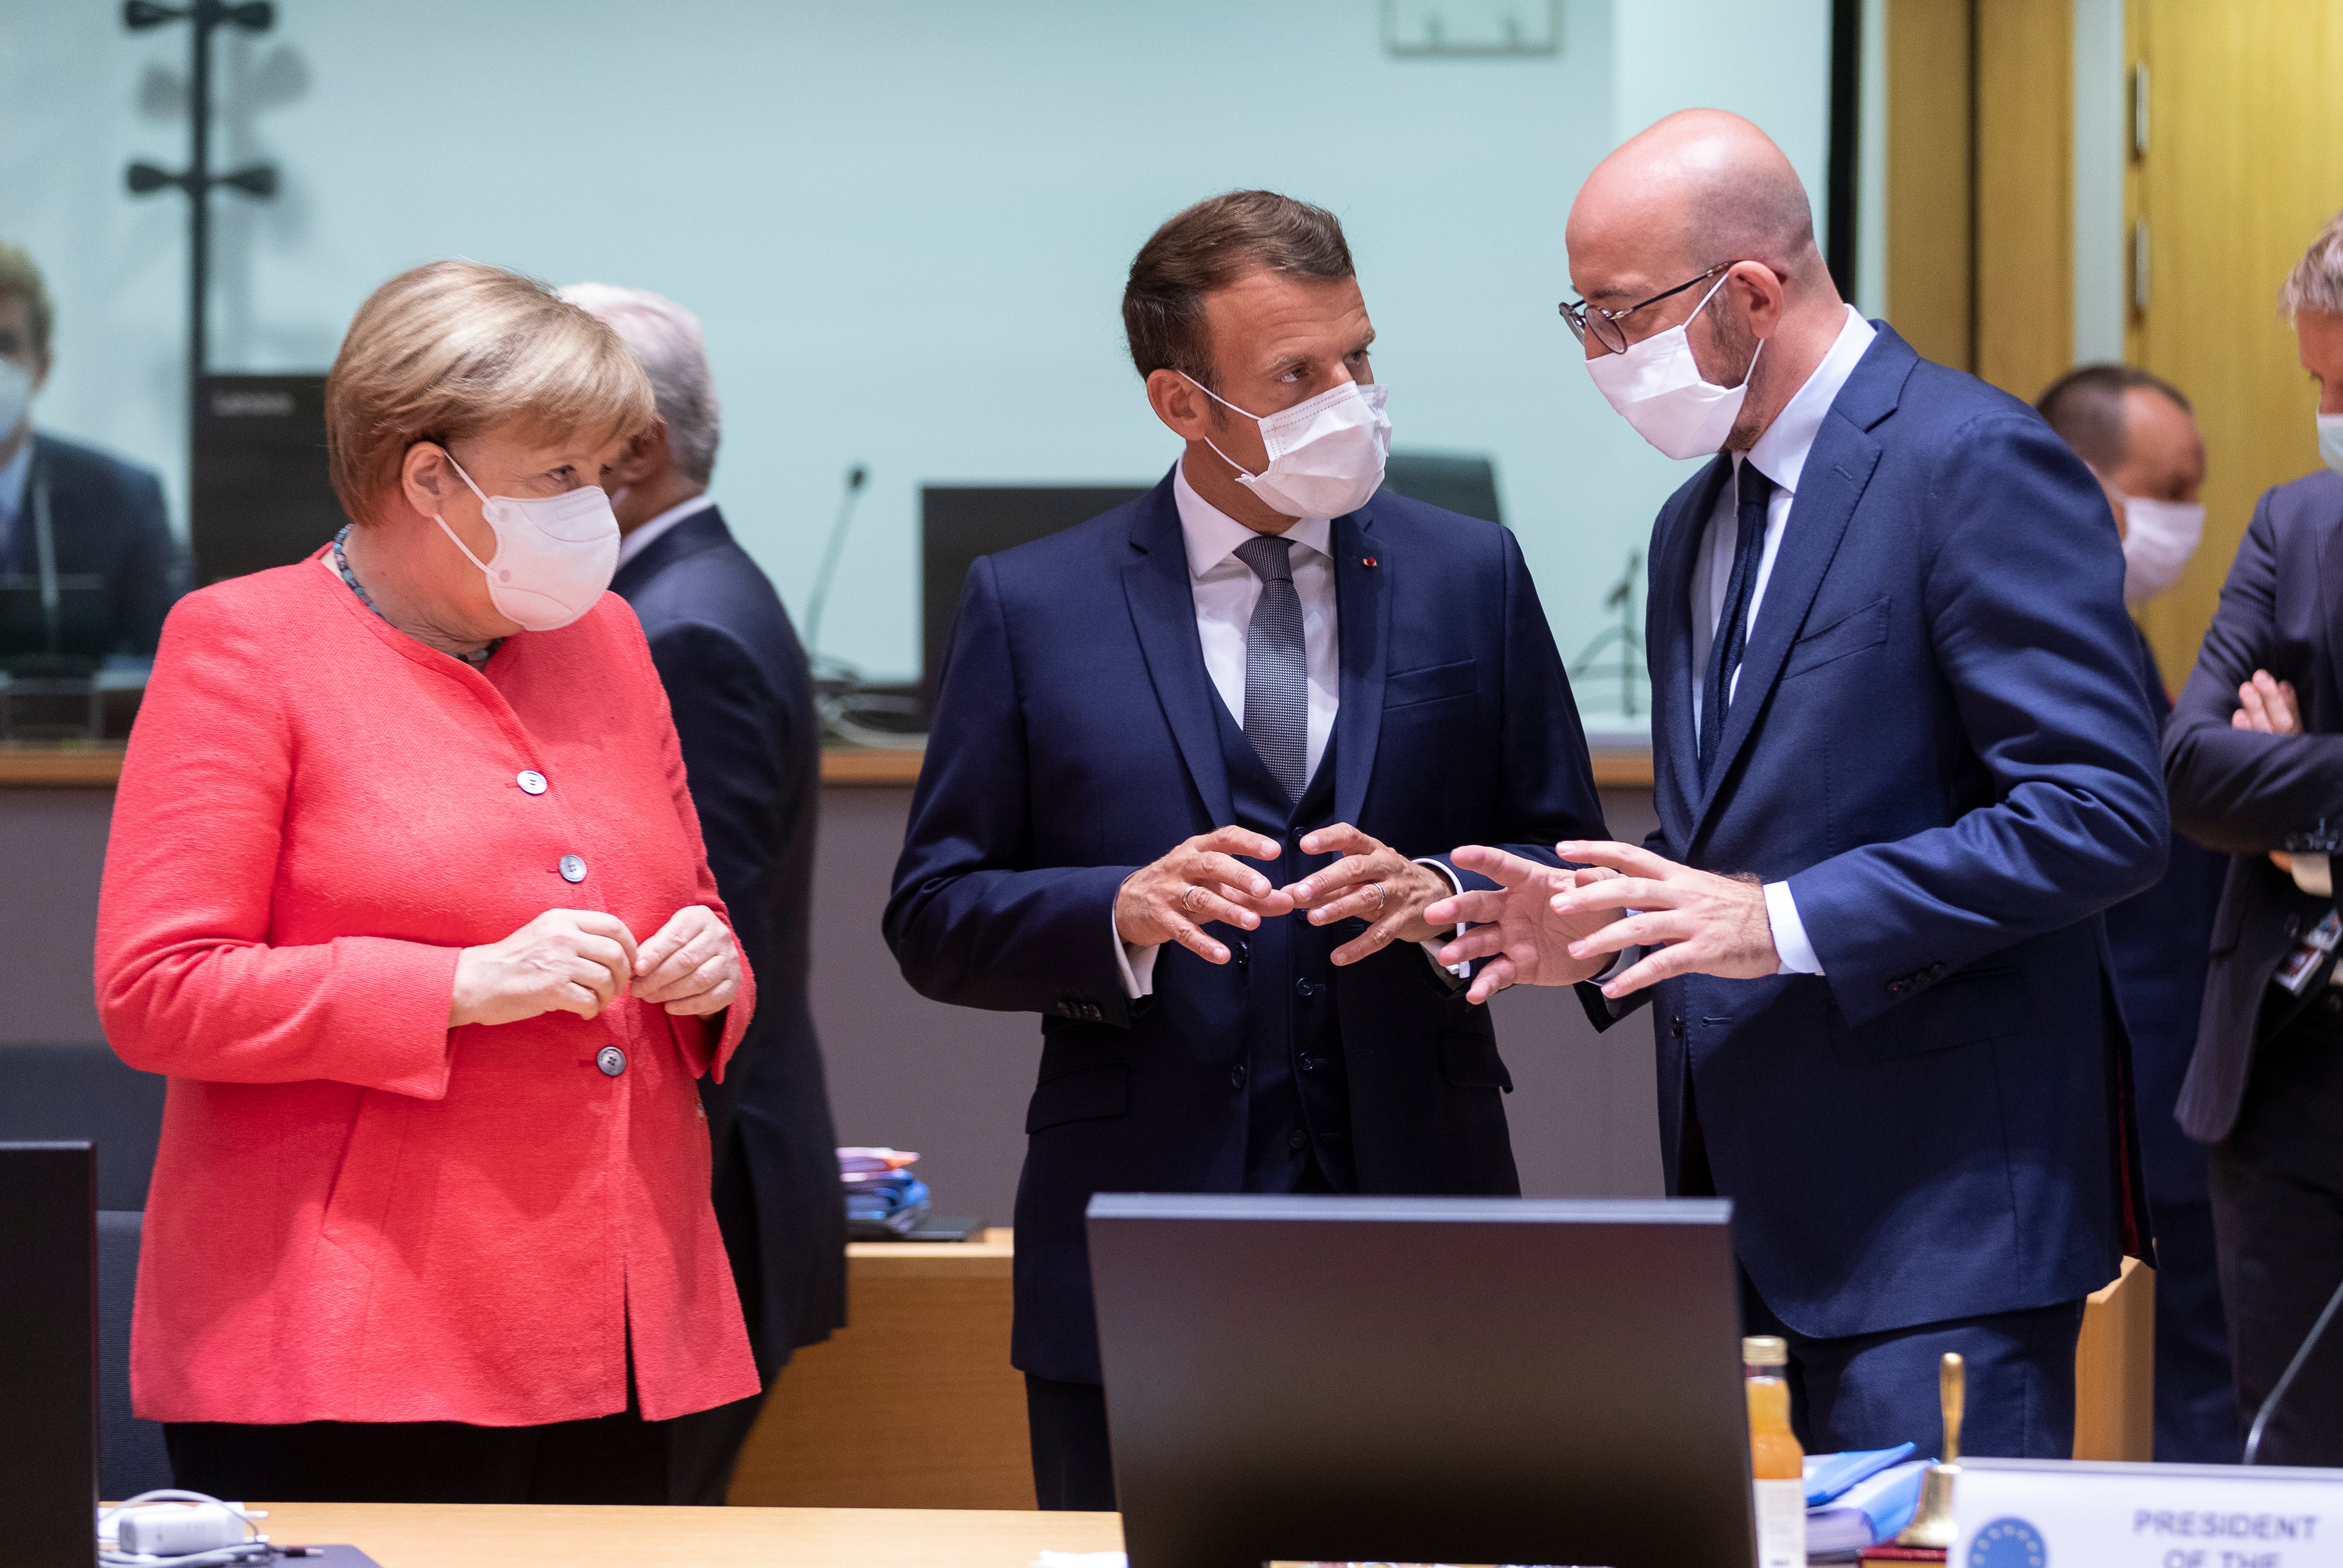 German chancellor Angela Merkel talks with French president Emmanuel Macron (centre) and Charles Michel, president of European Council during an EU summit in Brussels in July 2020